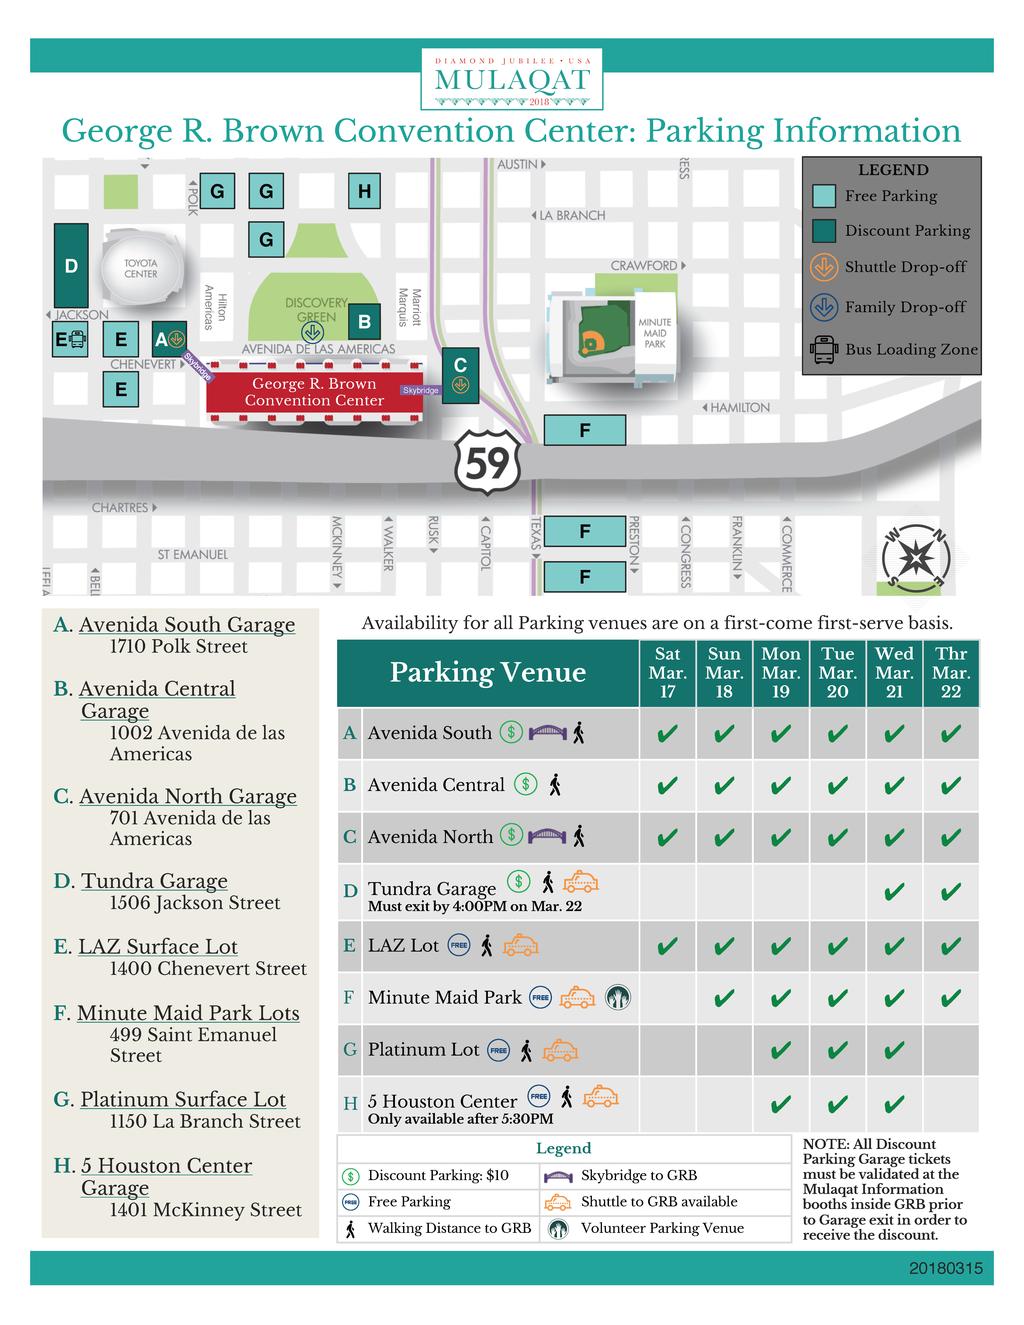 GRB Parking Information Flyer Flyer will provide information on parking options and availability at GRB during the Mulaqat week Please pay